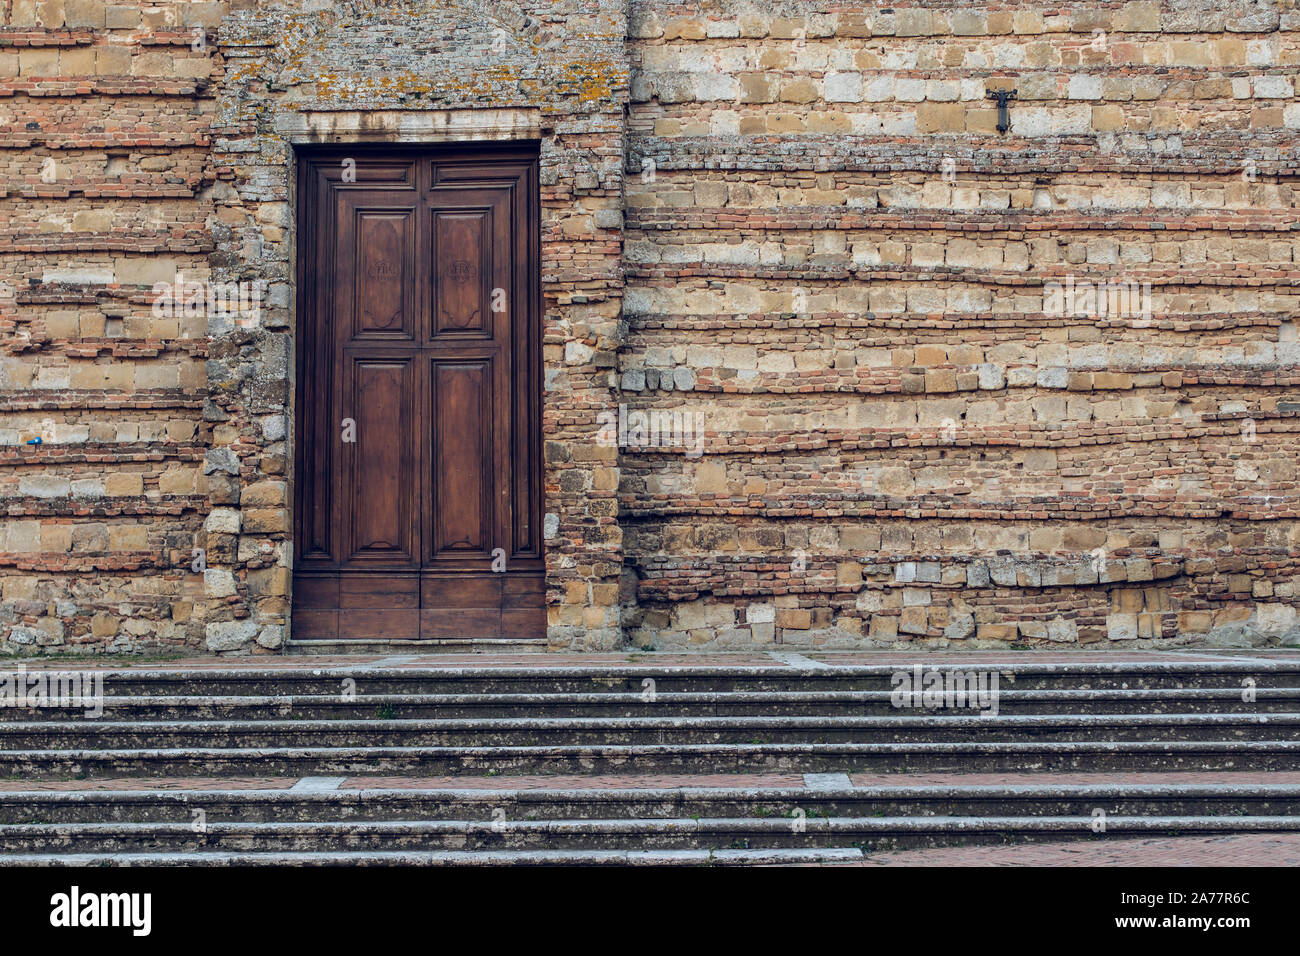 Old wooden closed door on a brick wall facade in Italy Stock Photo